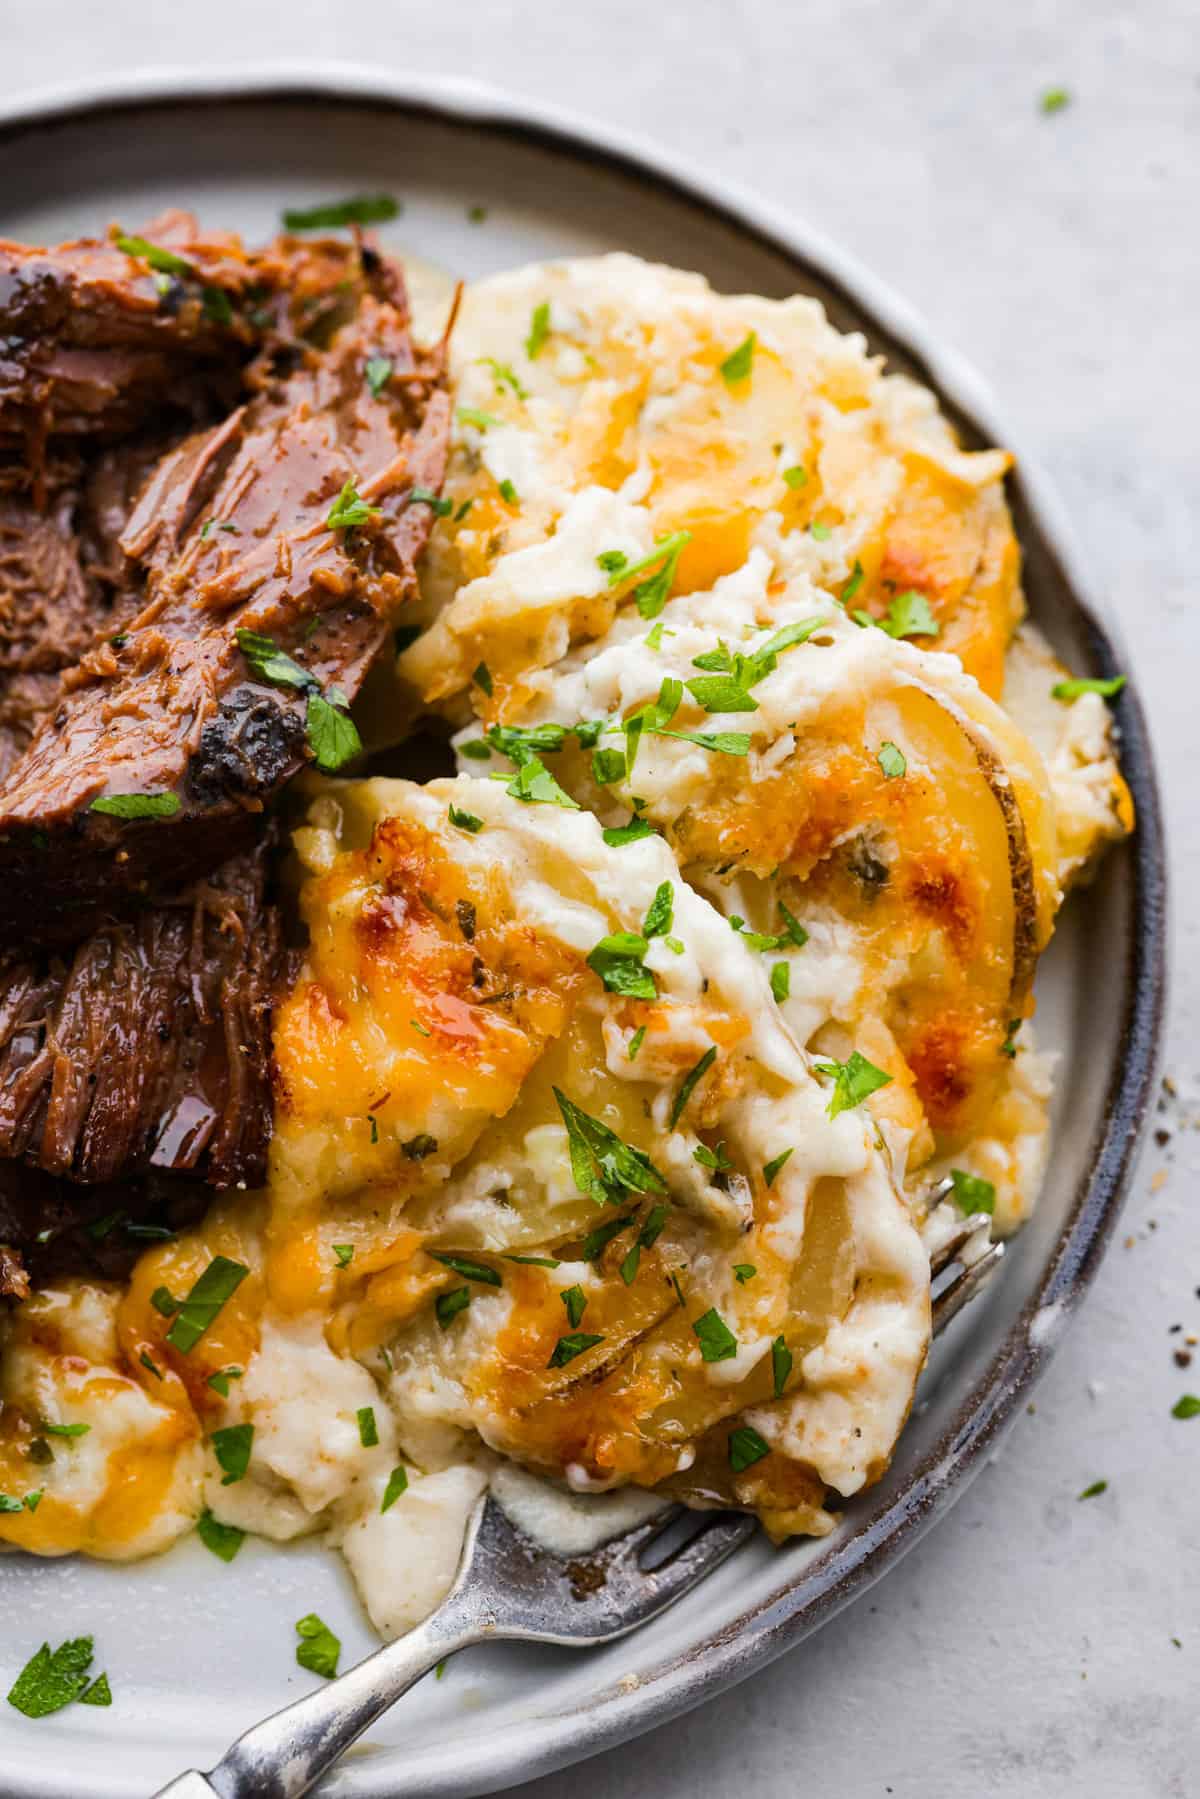 Close top view of au gratin potatoes on a gray plate served with shredded beef on the side.